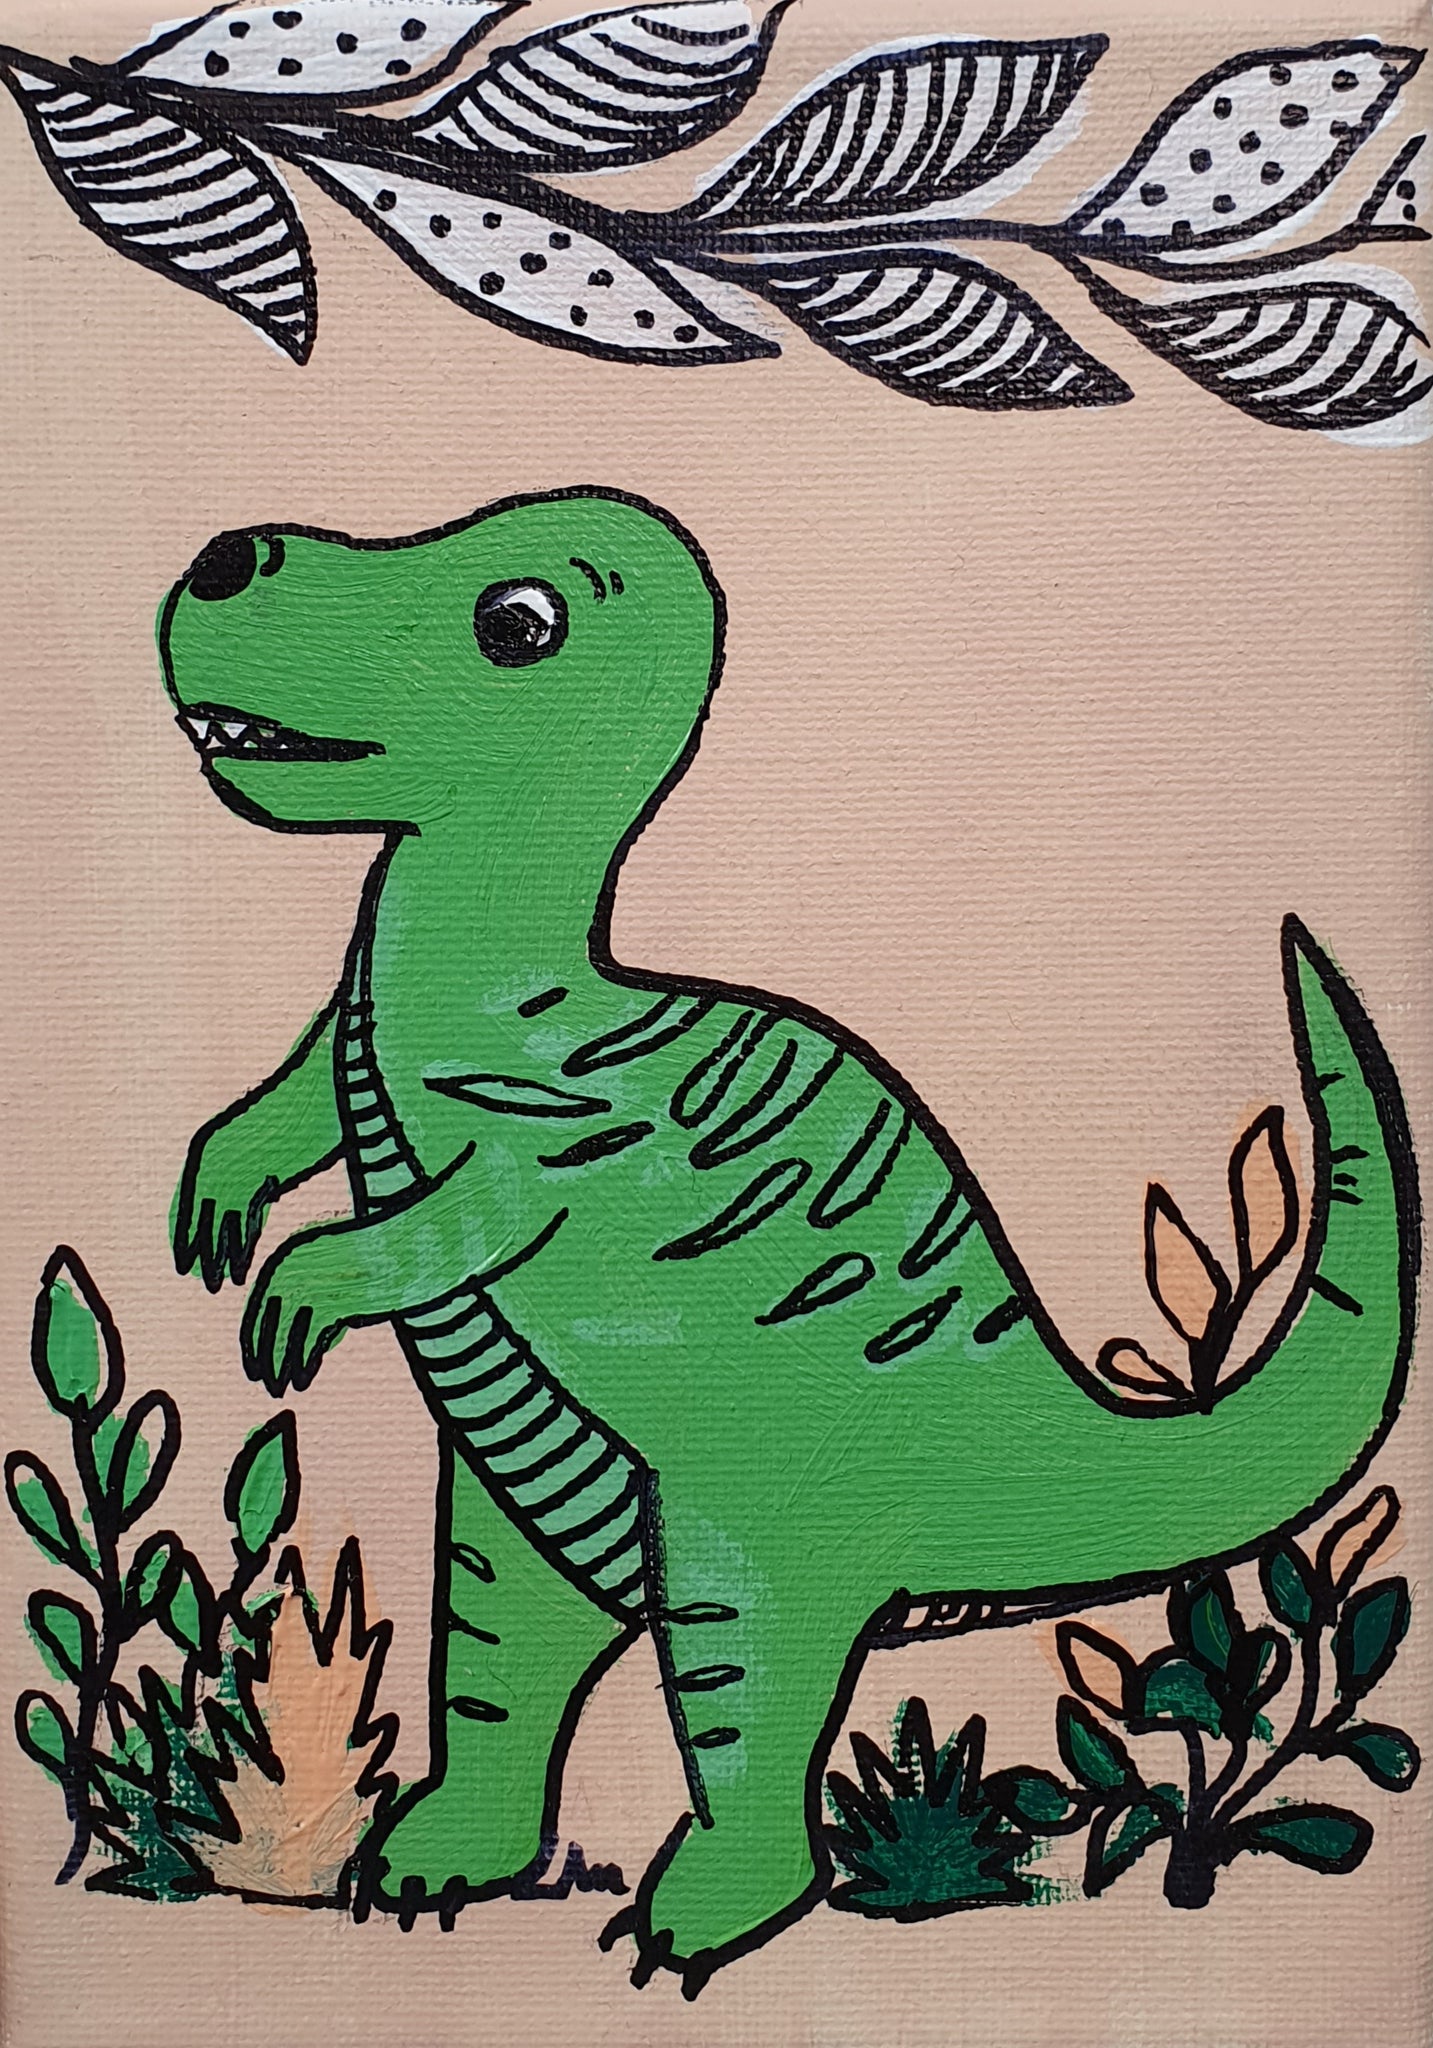 Natalie The T-Rex - Acrylic Painting